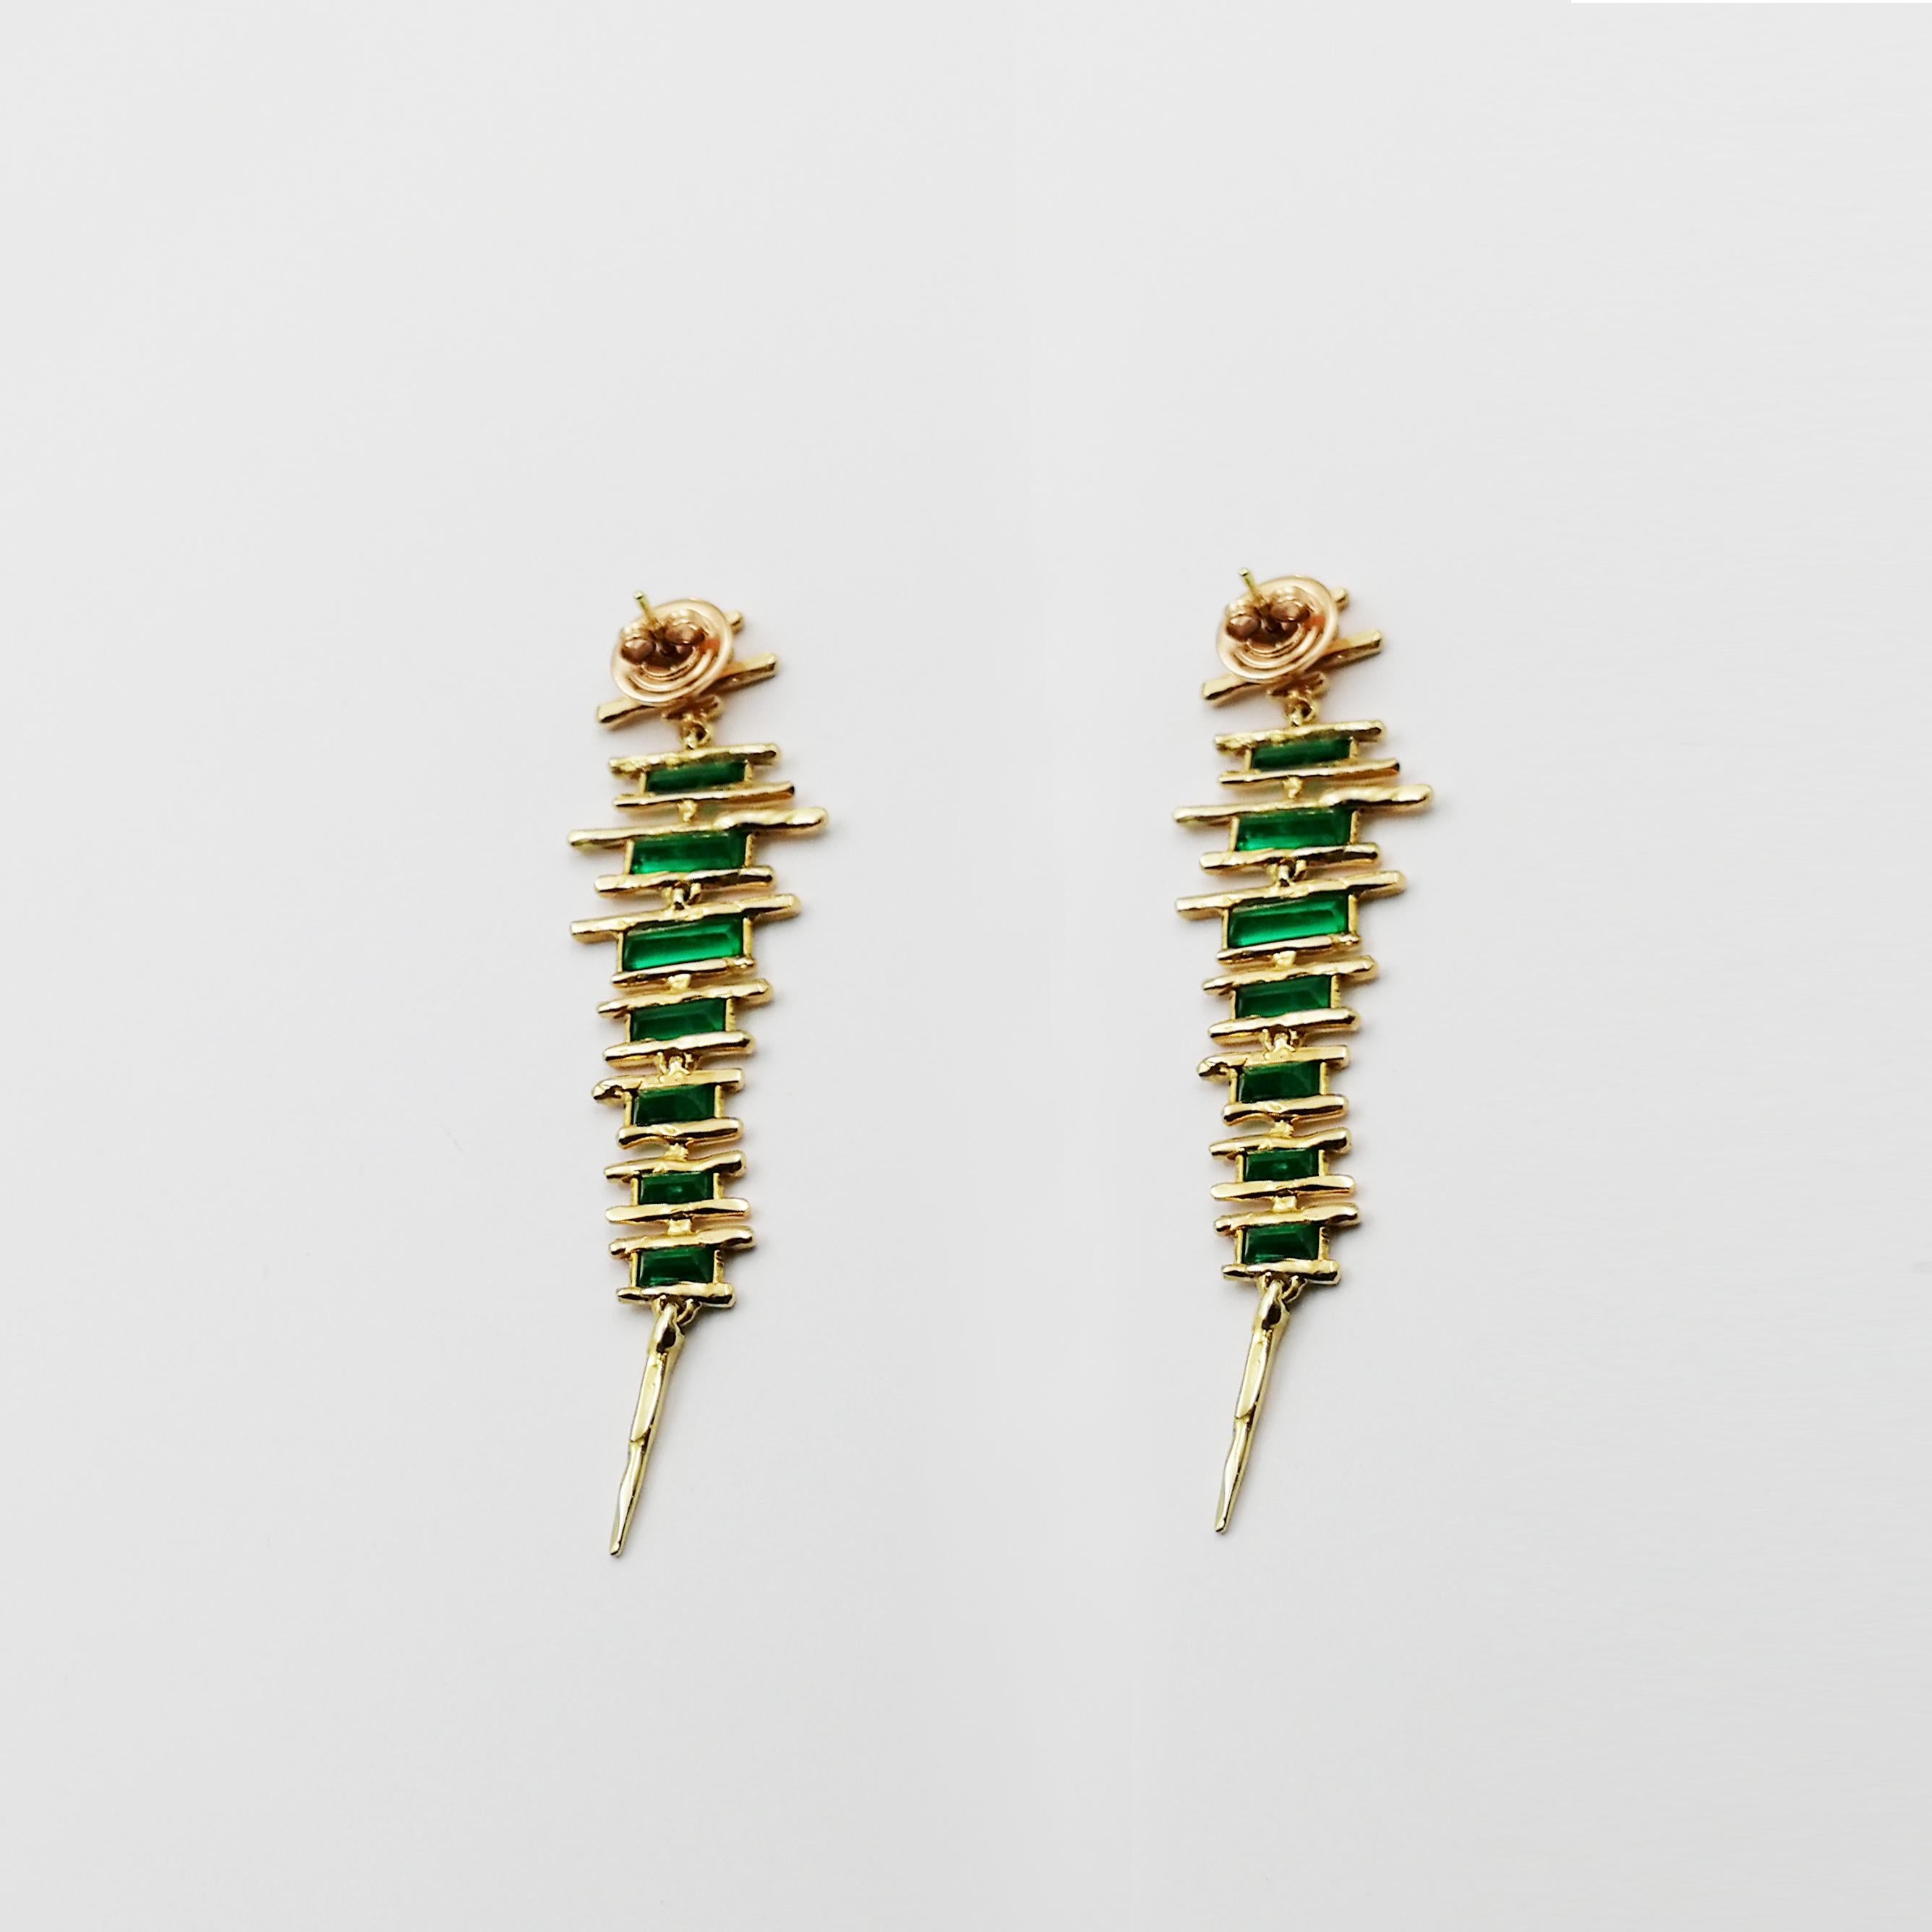 Exceptionally artistic in their design, these earrings convey the appeal of an artwork painted to embellish the earlobe and appear like brush strokes of gold underlining the alluring beauty and captivating color of green emeralds. The dynamic ductus